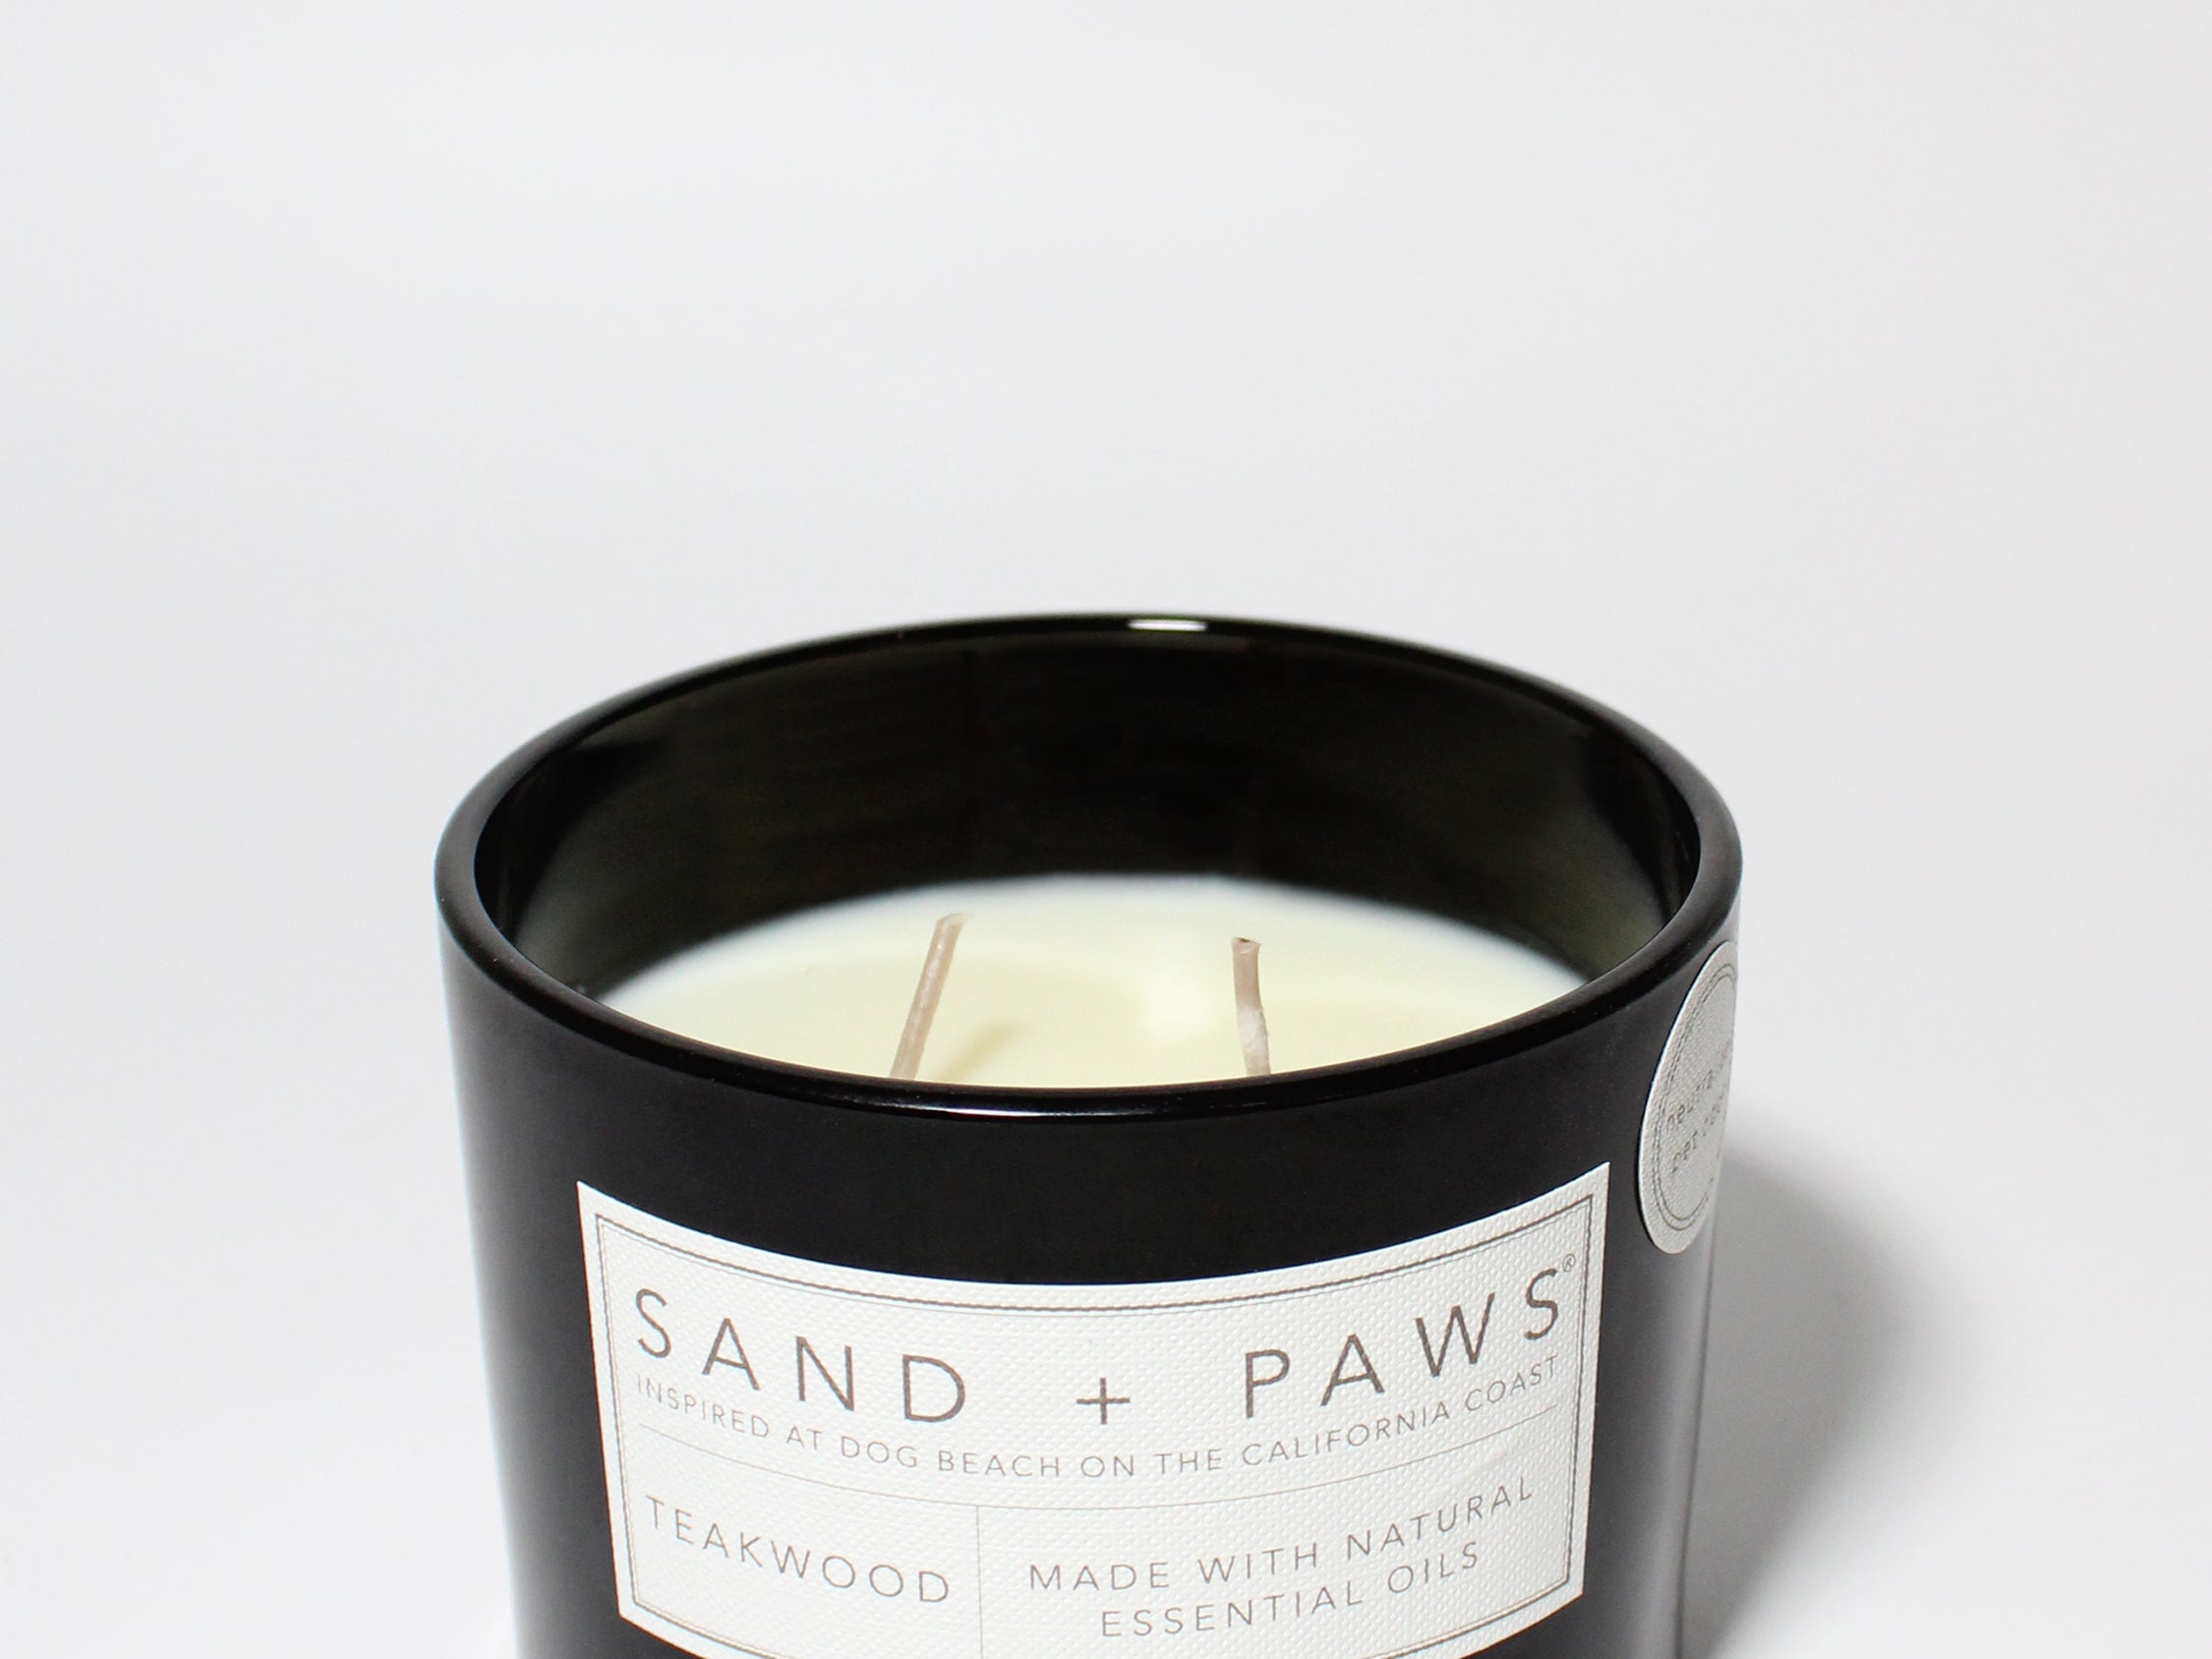 Sand + Paws Teakwood 12 oz scented candle Black vessel with Carved I ruff you lid